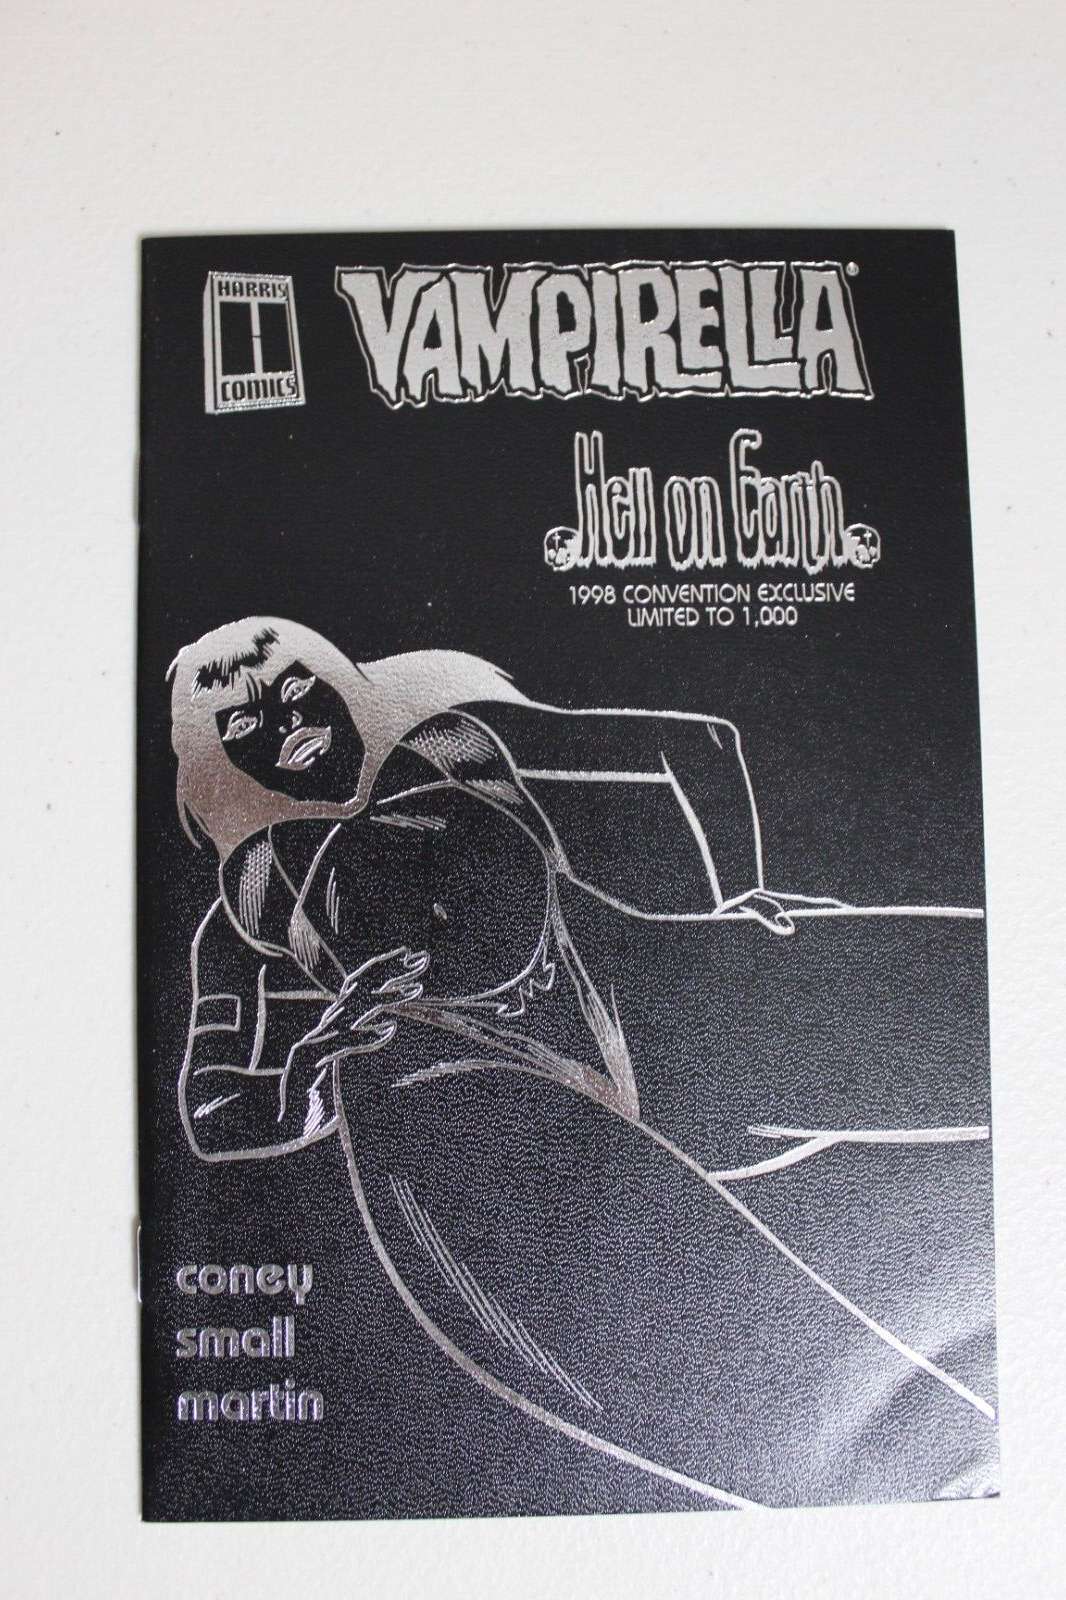 VAMPIRELLA HELL ON EARTH - 1998 Convention Exclusive Ashcan variant  - 1 of 1000